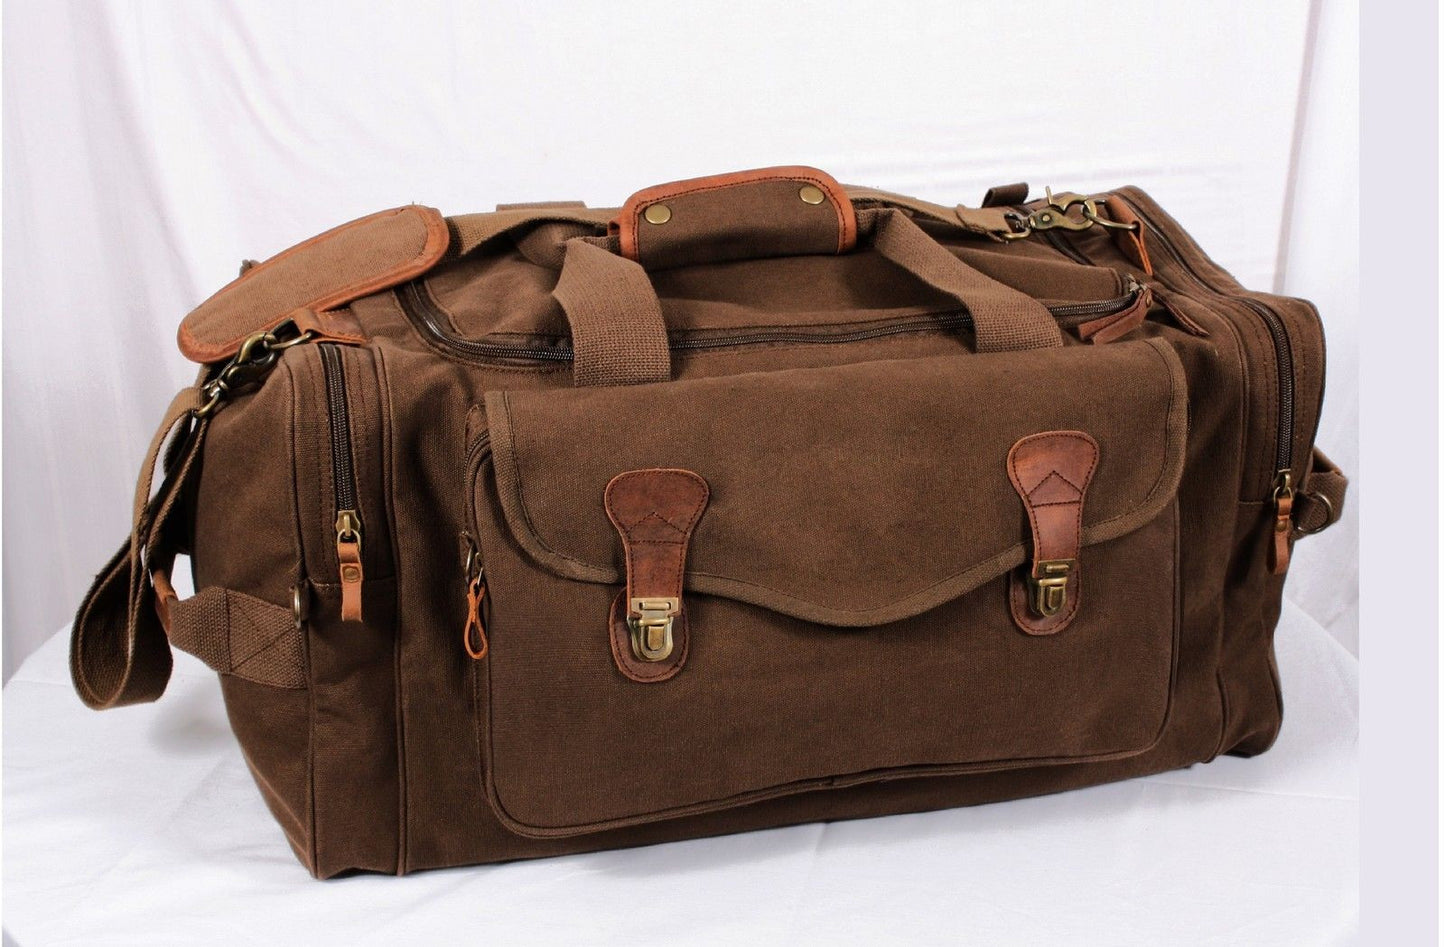 Brown Weekender Bag w/ Leather Accents - Stylish Overnight Travel Bag